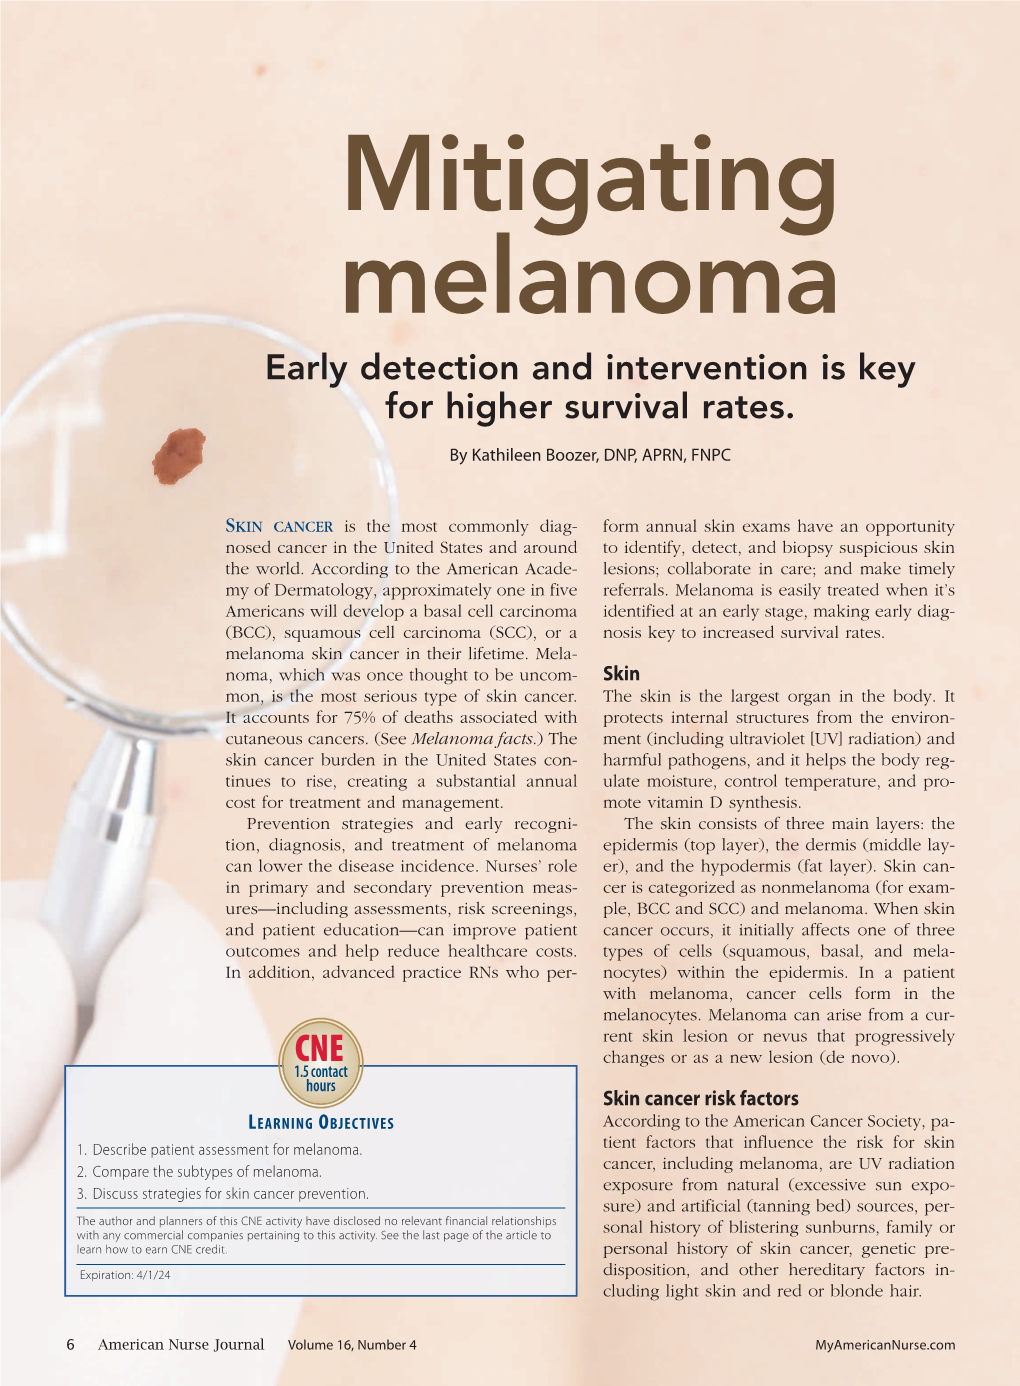 Mitigating Melanoma Early Detection and Intervention Is Key for Higher Survival Rates